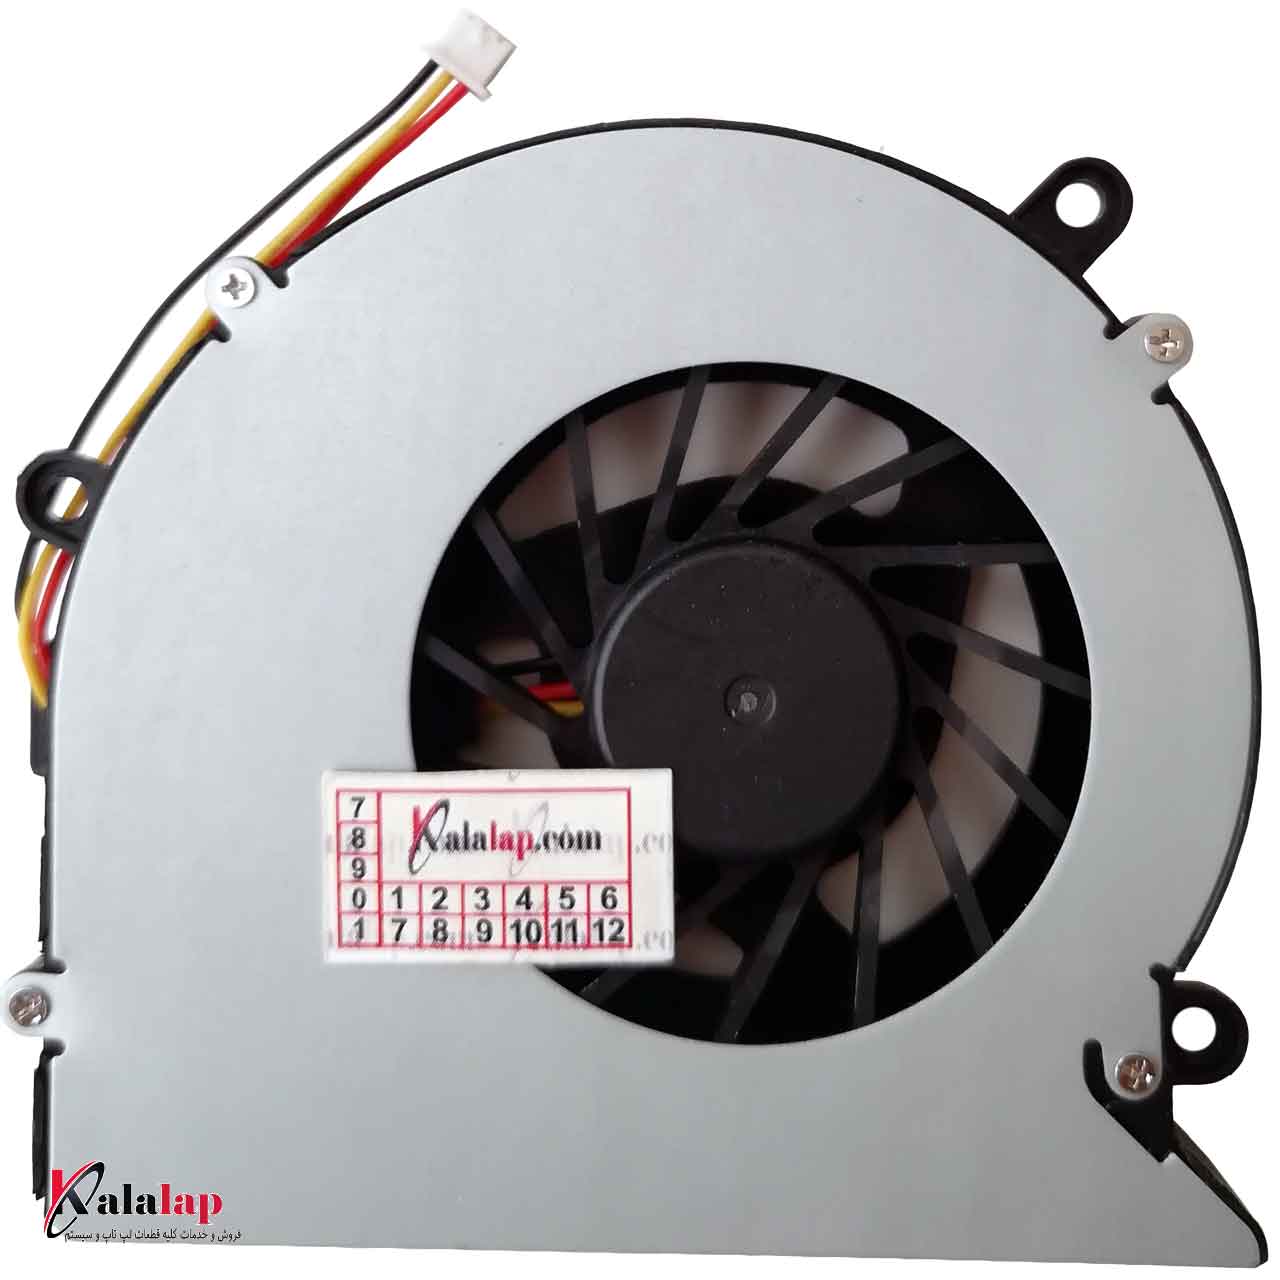 DBTLAP CPU Cooling Fan Compatible for Lenovo Y430 G430 G530 V450 E41 K41 K42 E42 E42A E42G E42L Laptop CPU Fan